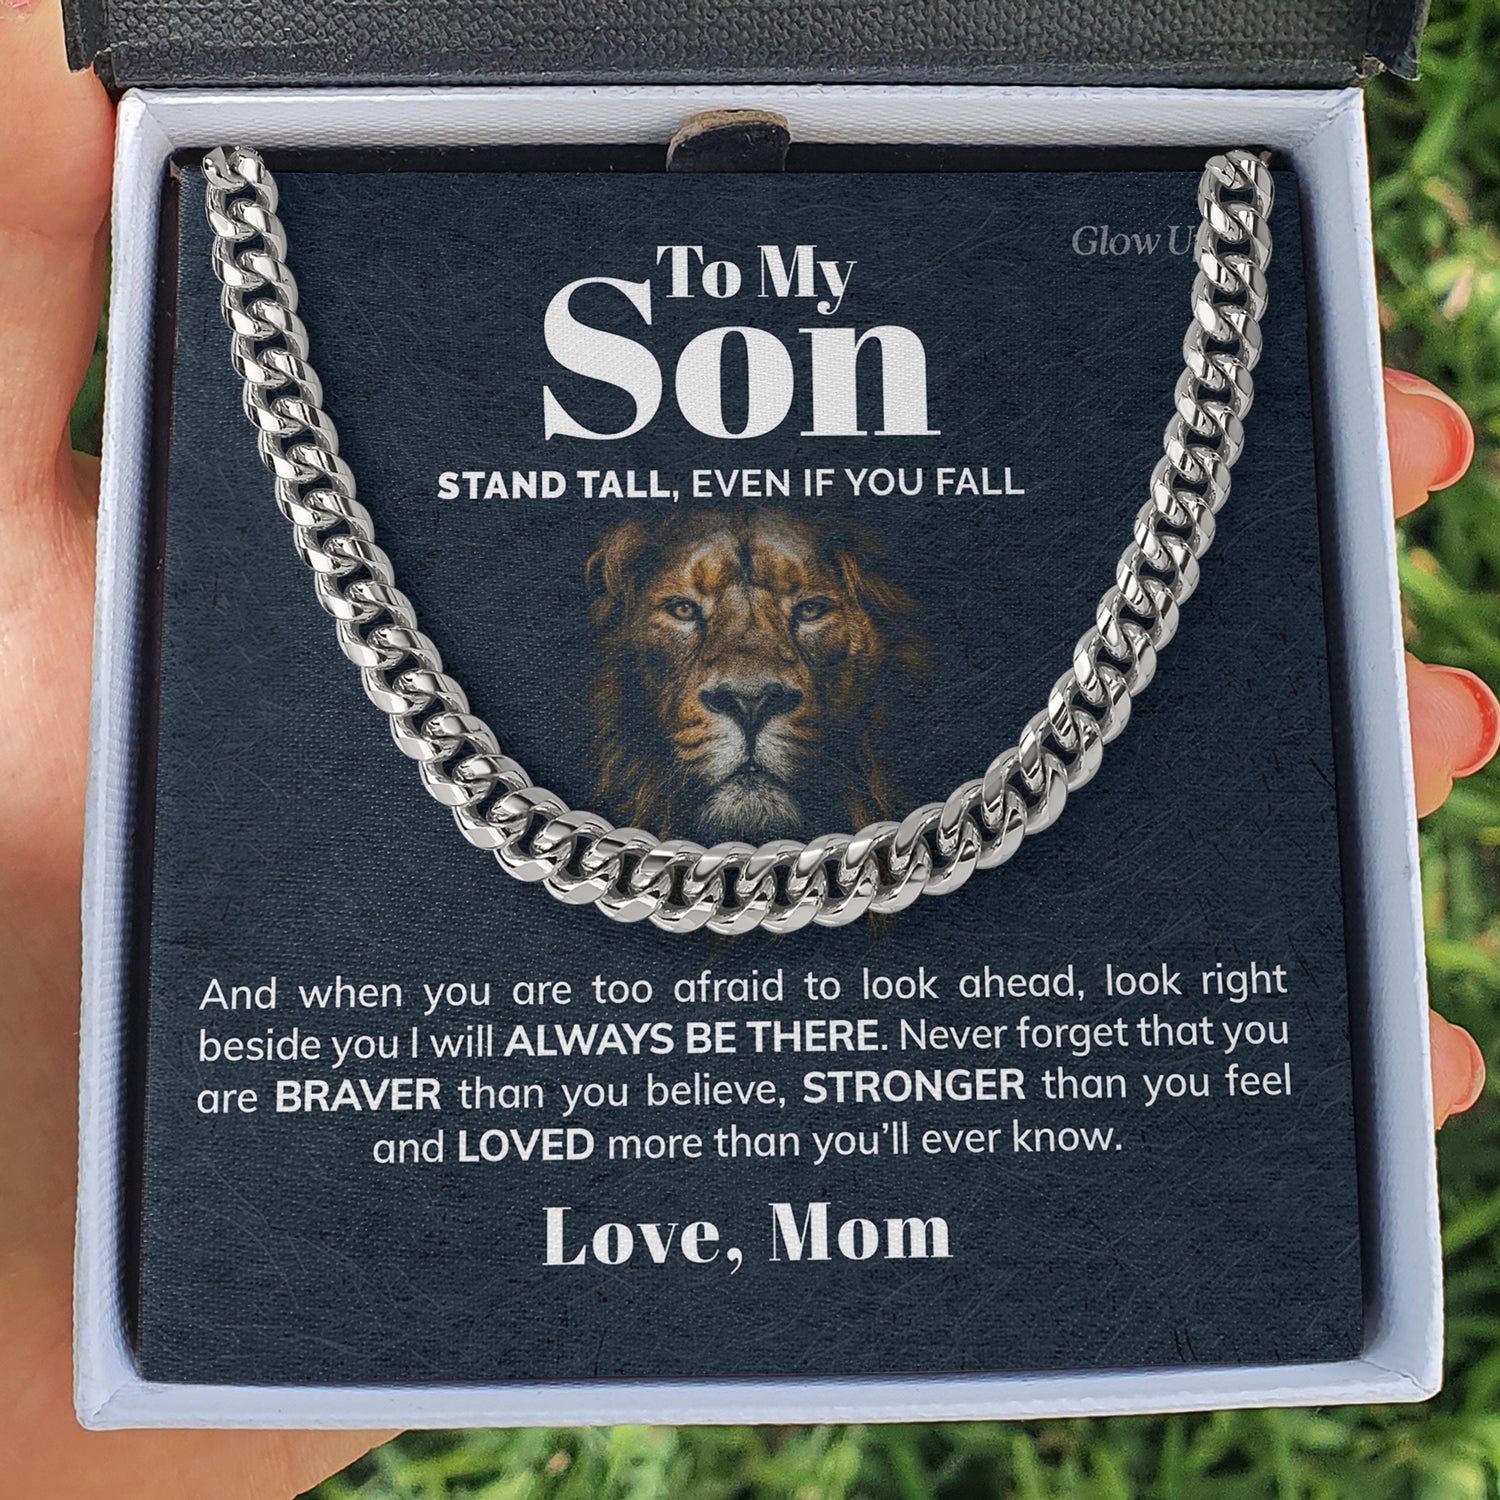 ShineOn Fulfillment Jewelry 316L Stainless Steel / Two-Toned Box To My Son - Stronger than you feel  - Cuban Link Chan